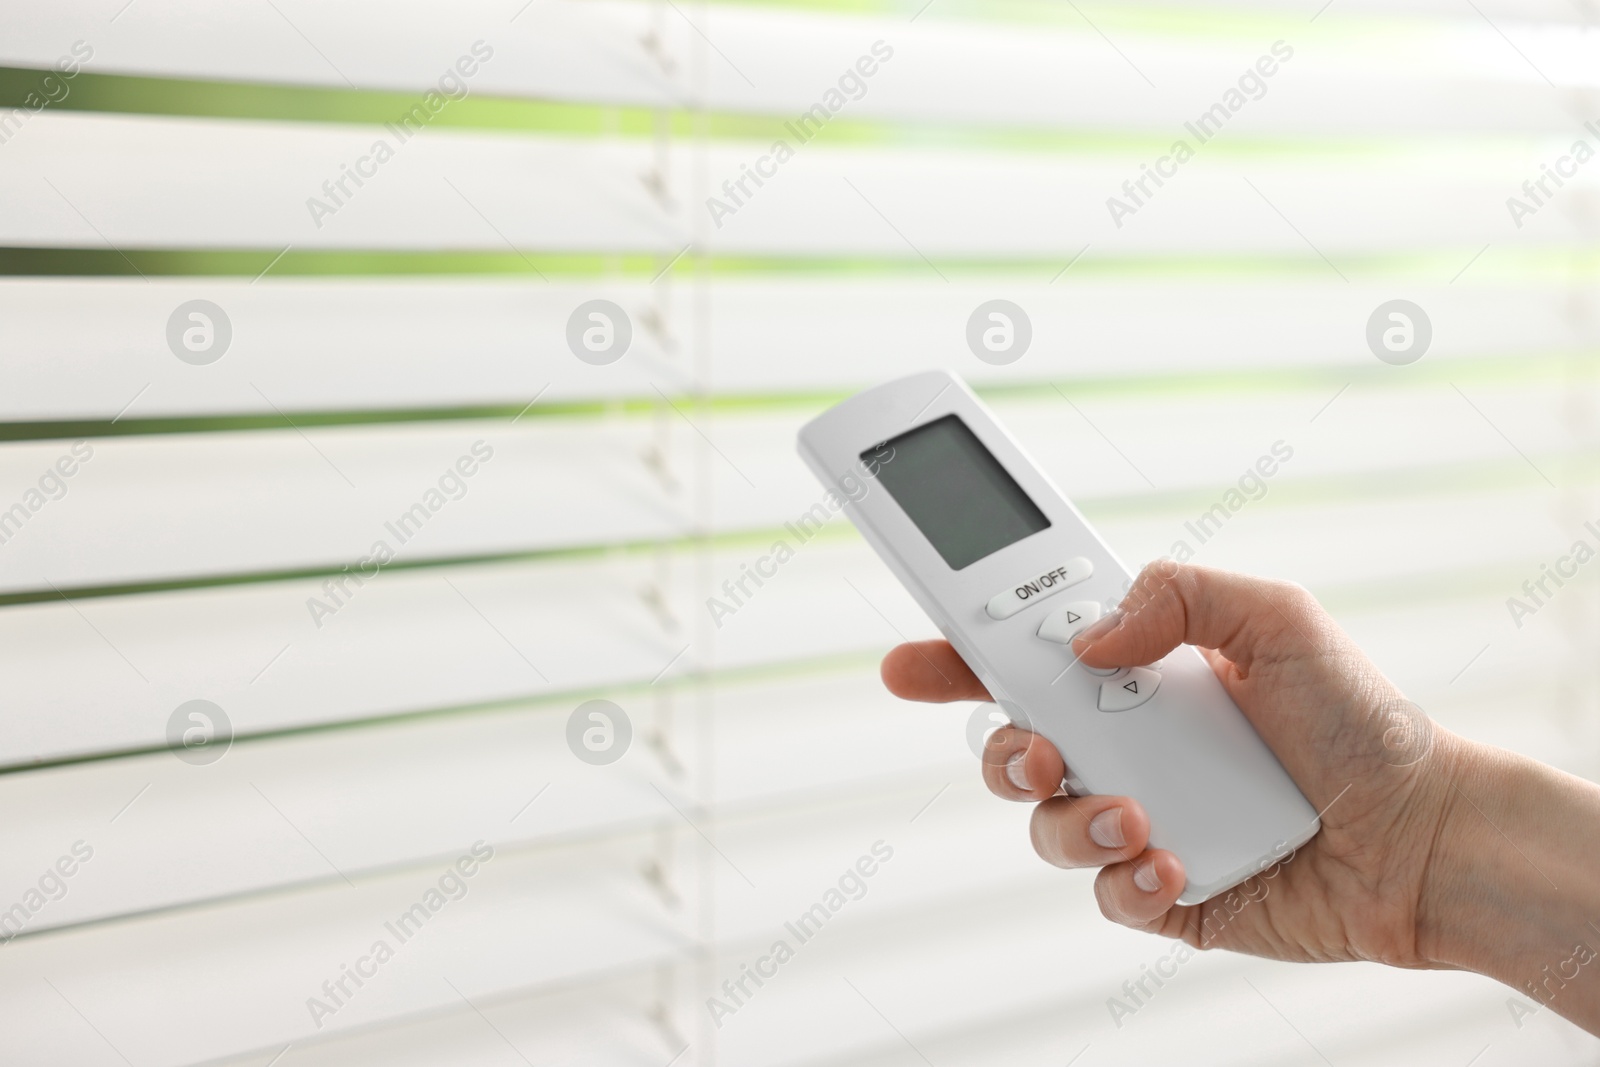 Photo of Woman using remote control to adjust window blinds indoors, closeup. Space for text